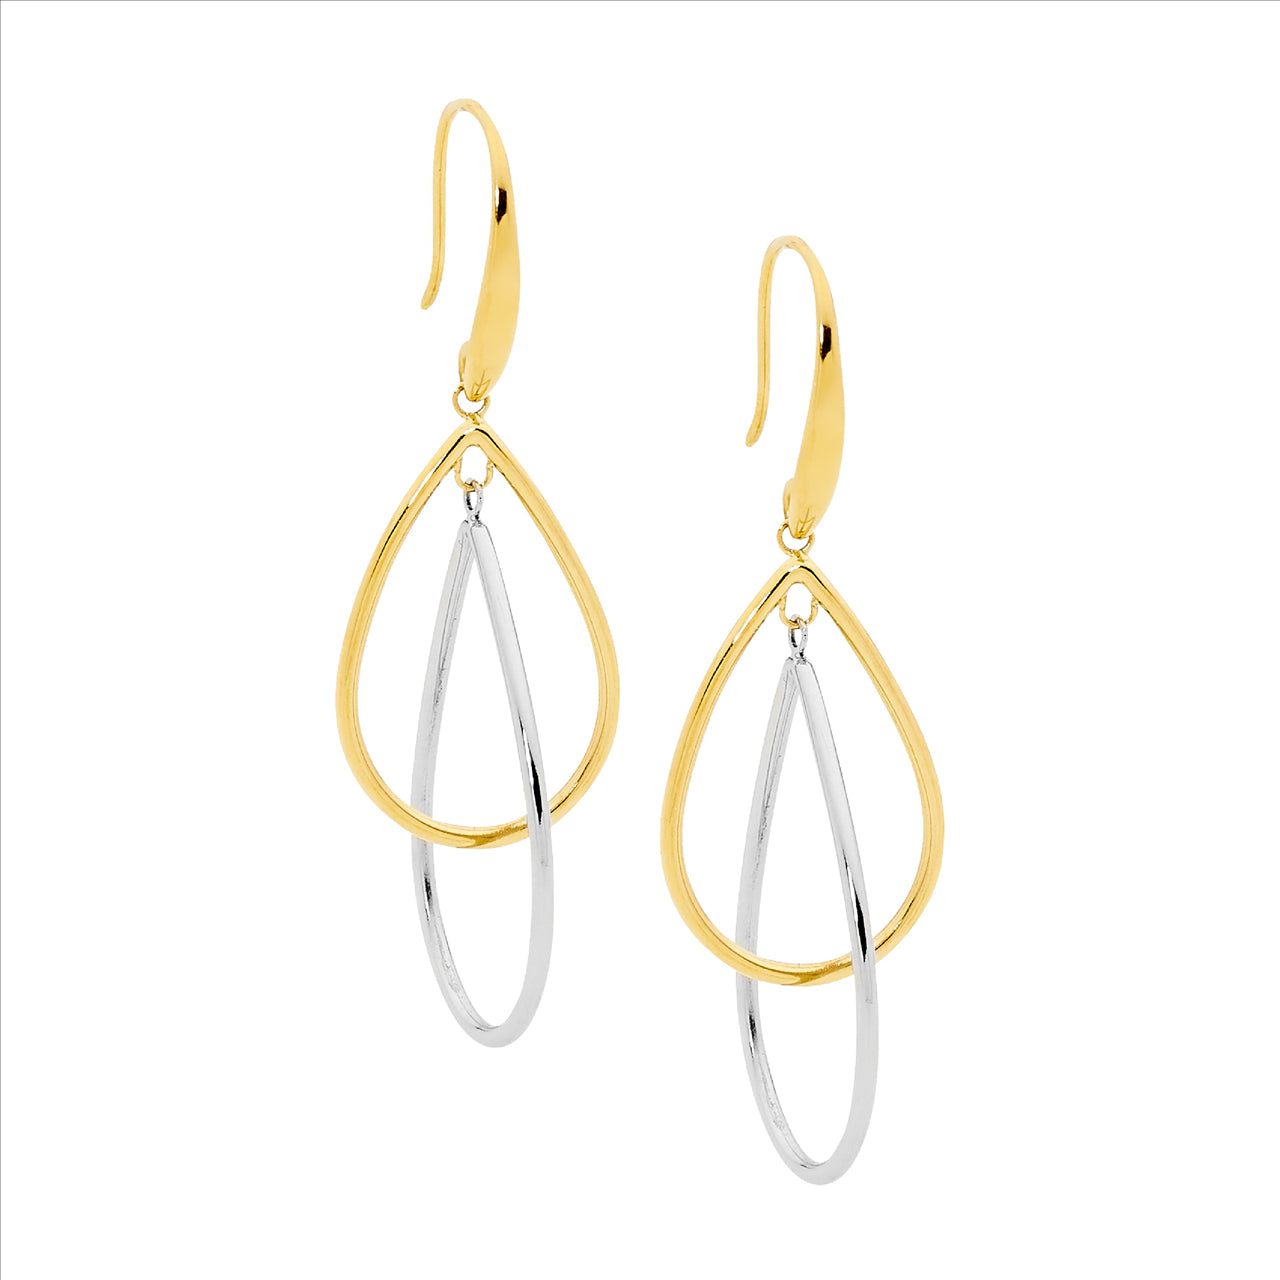 Stainless Steel Double Open Tear Drop Earrings With Gold Plating.